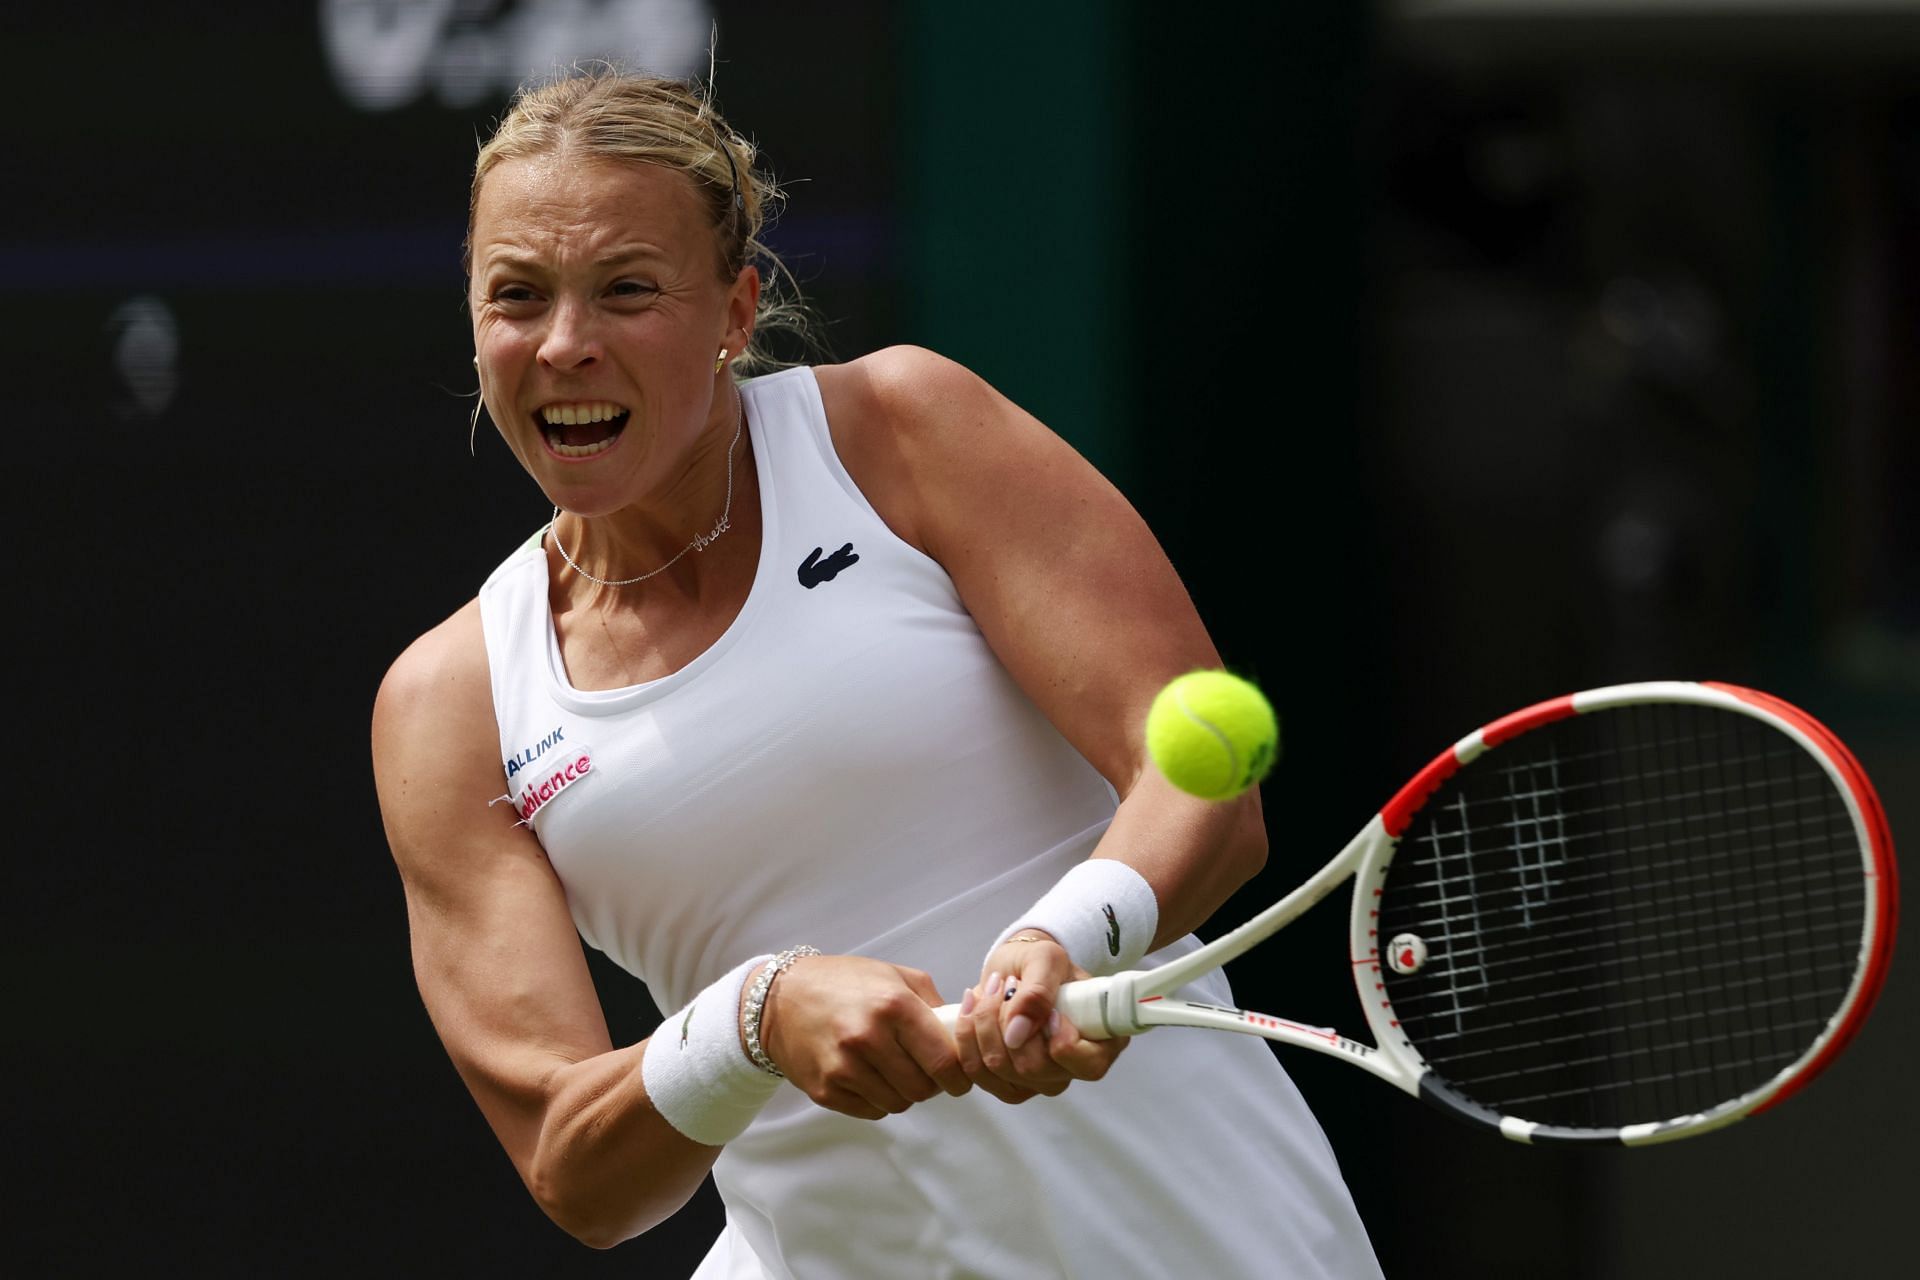 Kontaveit will look to book her place in the quarterfinals of the Hamburg European Open